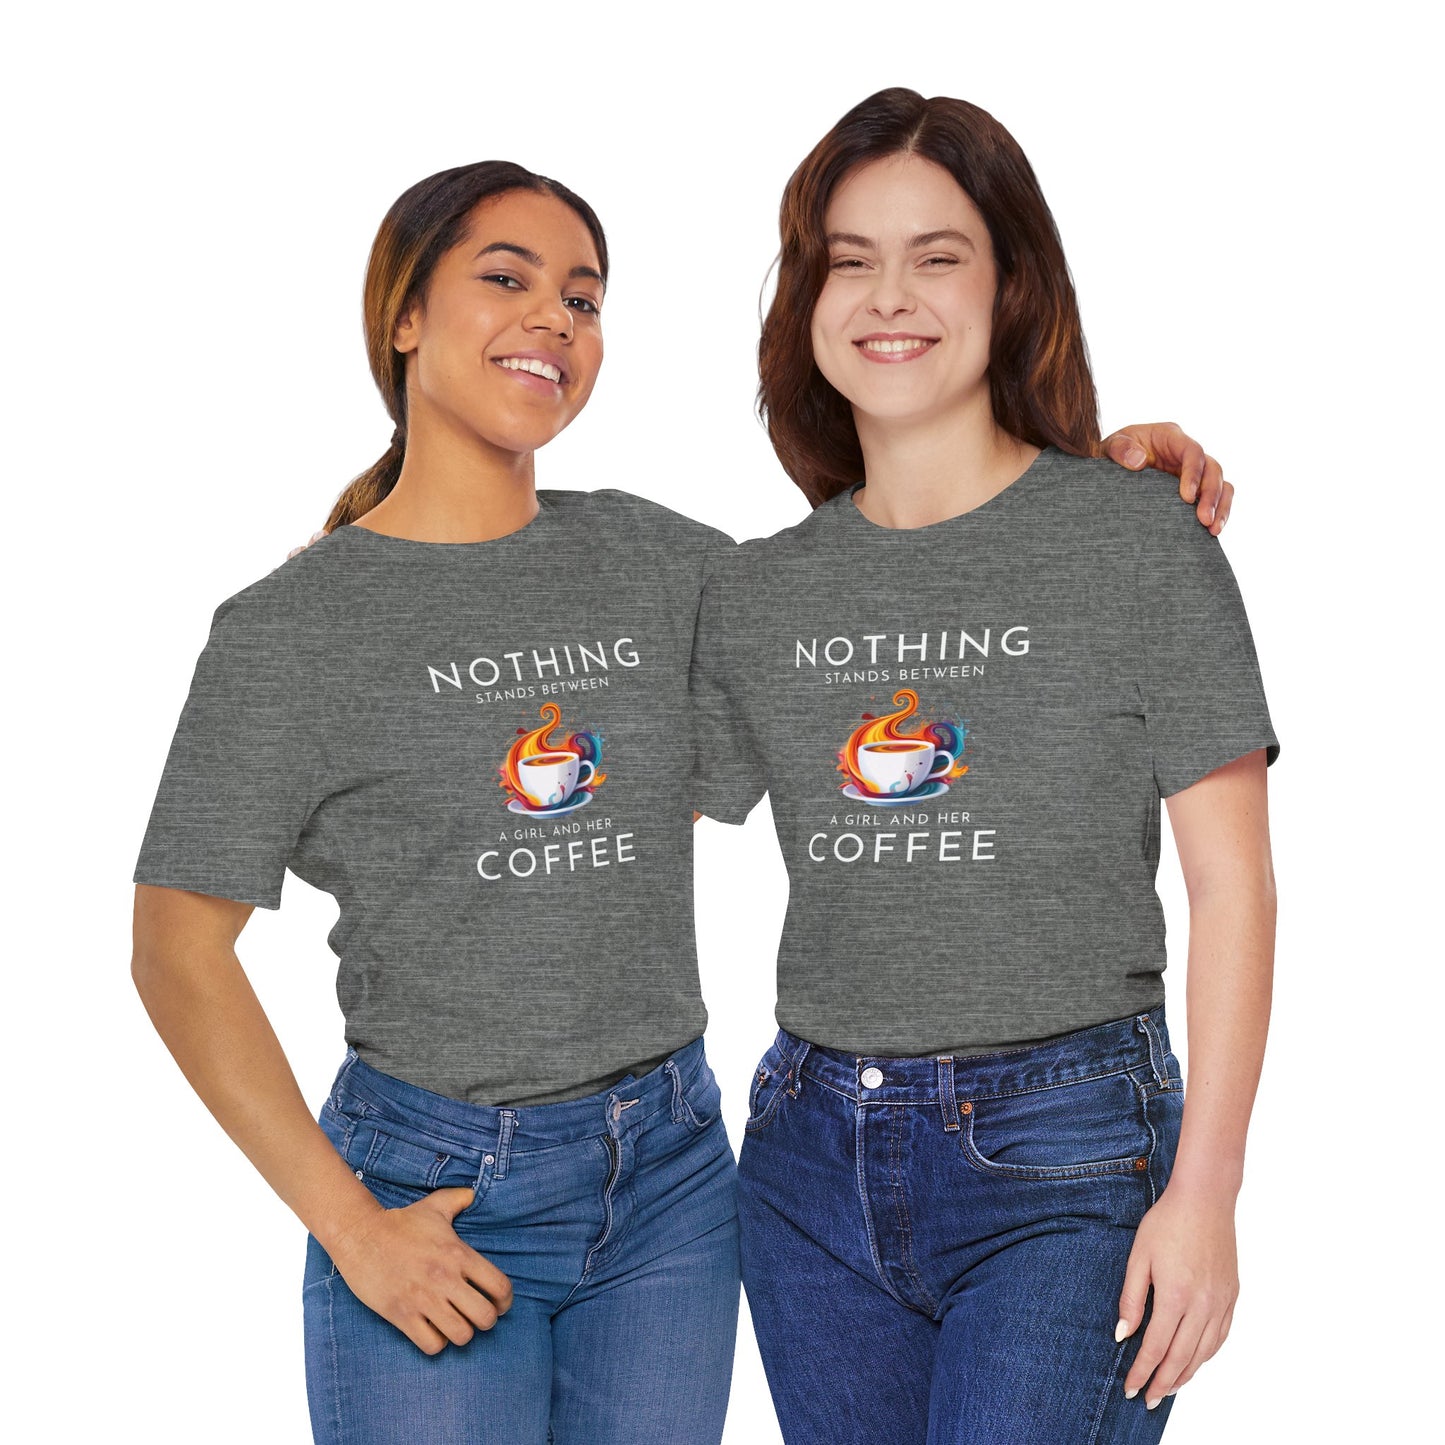 Nothing Stands Between a Girl and Her Coffee - Short Sleeve T-Shirt XS-5XL